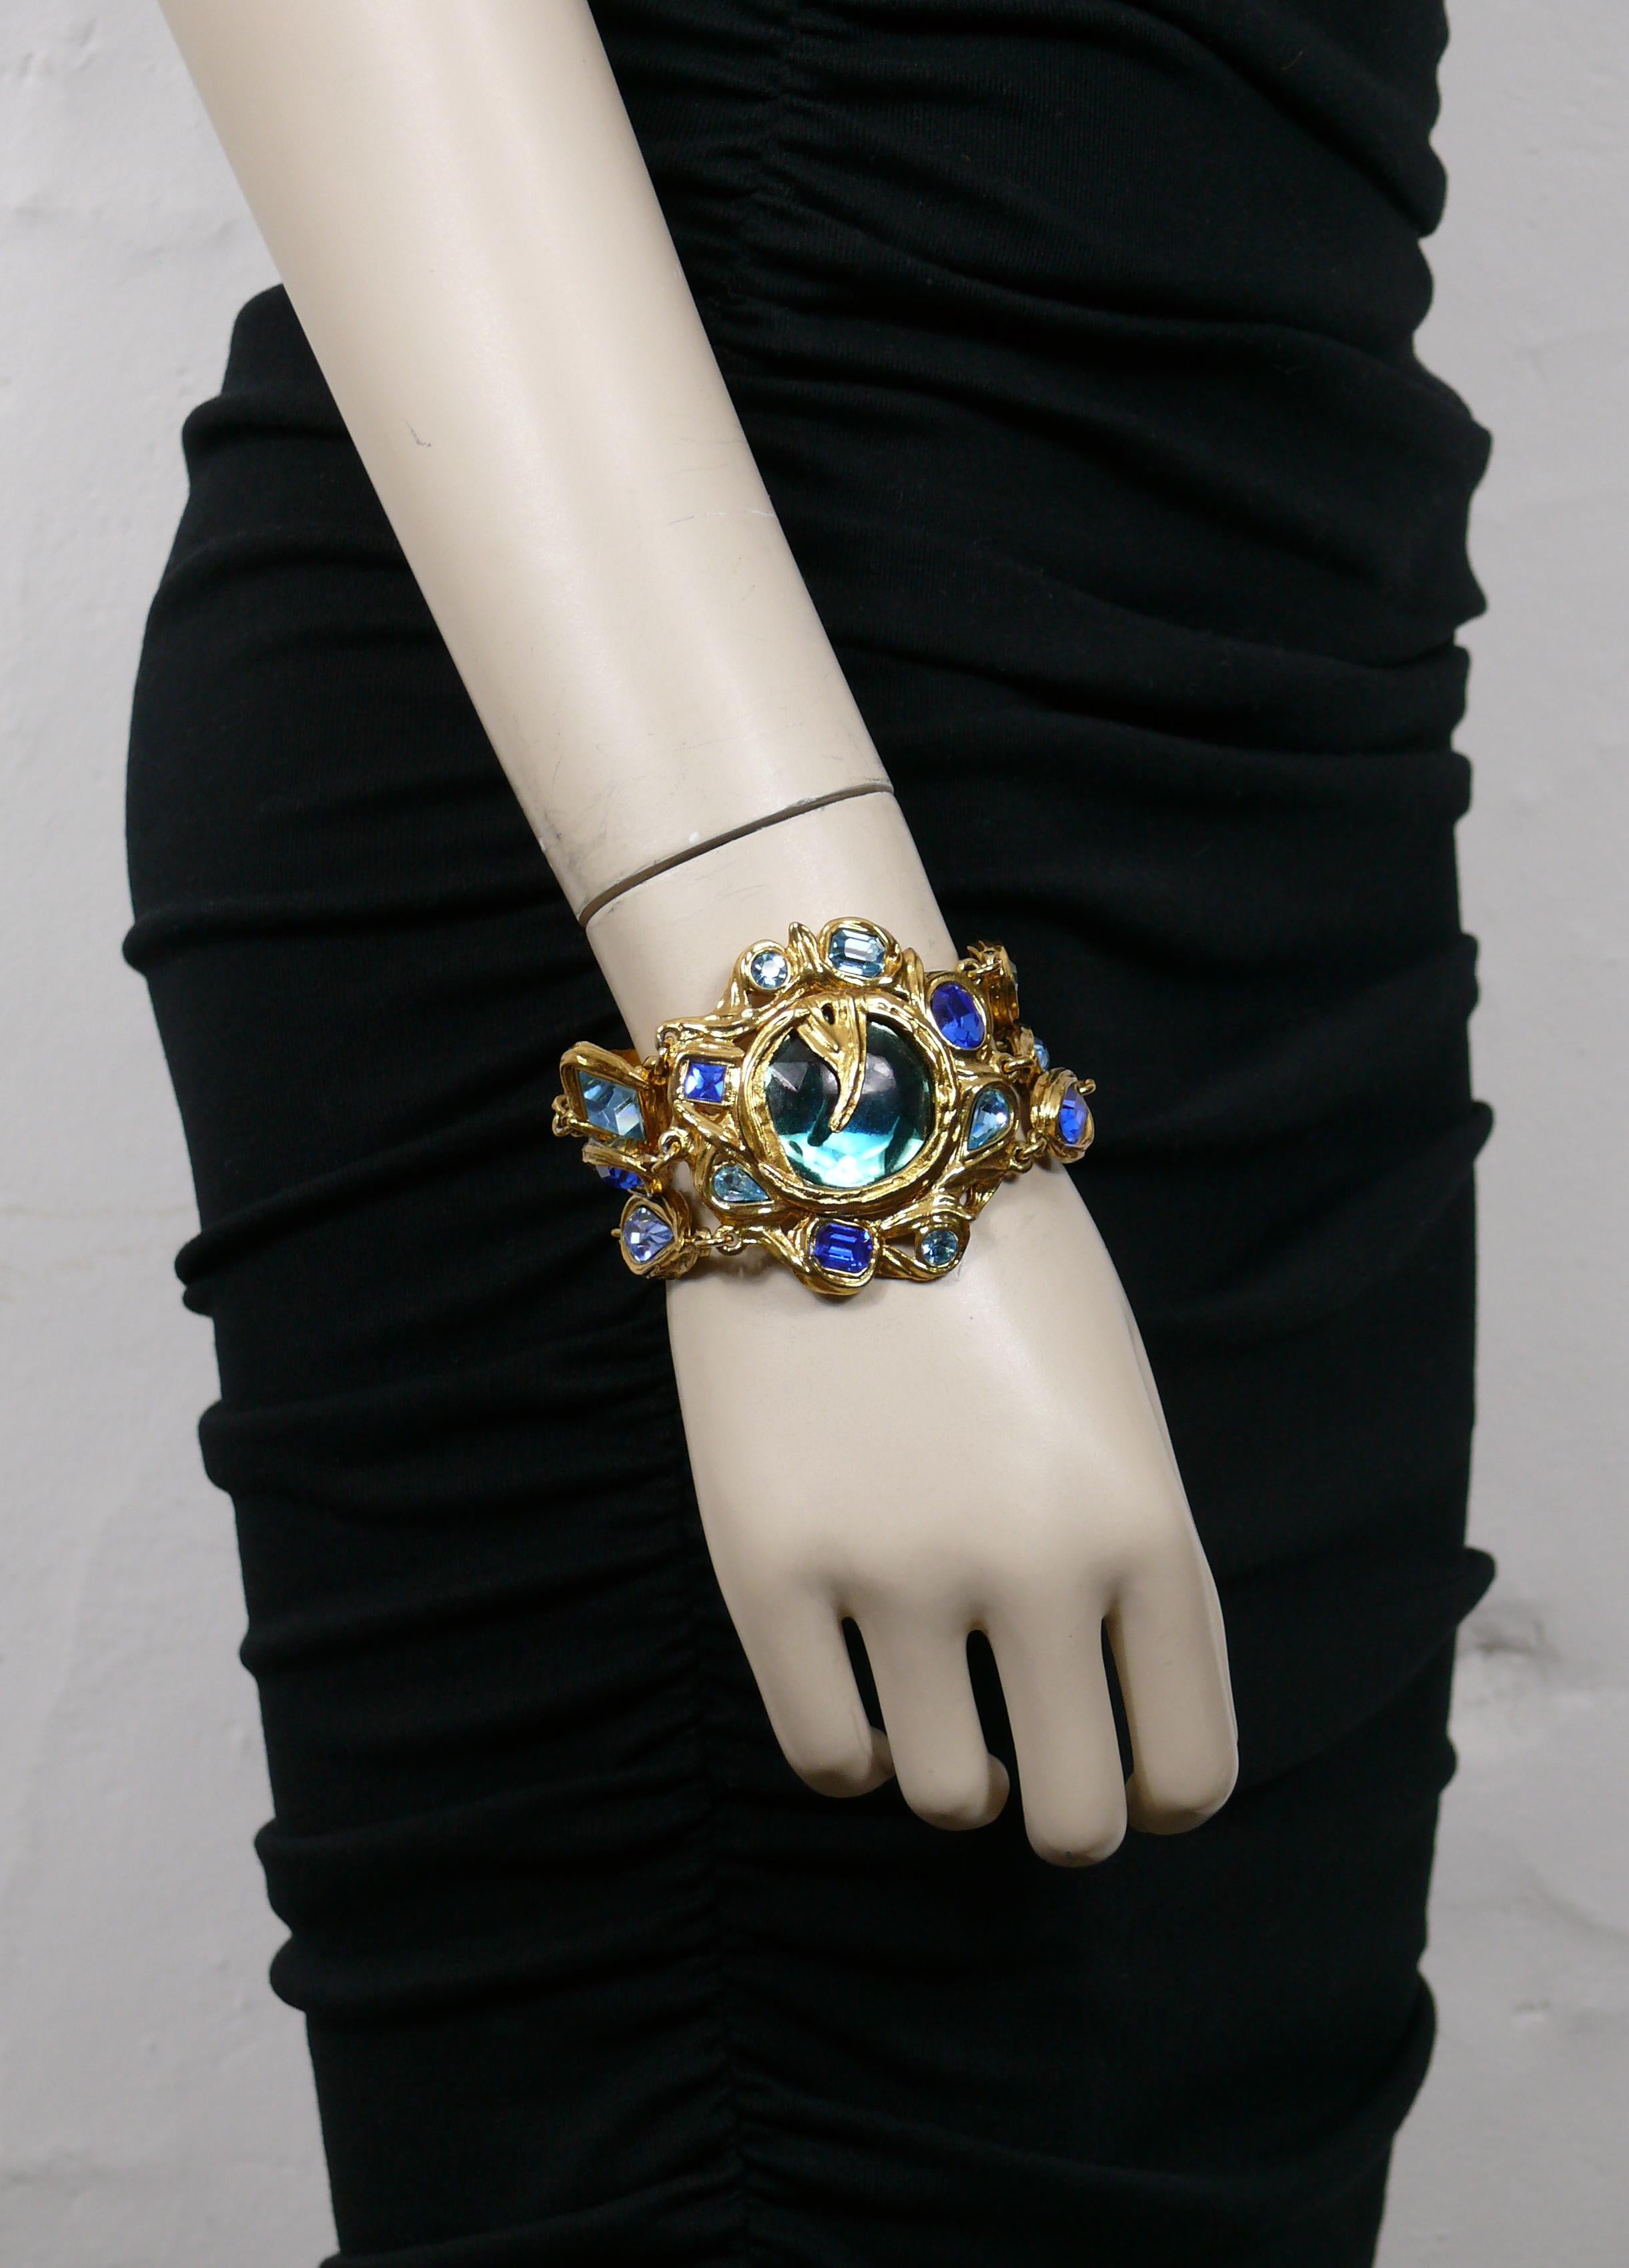 YVES SAINT LAURENT vintage three strand gold tone link CADIX bracelet embellished with blue shade crystals and a large blue resin cabochon at the center of the central medallion.

Secure clasp closure.

Embossed YSL Made in France.

Indicative